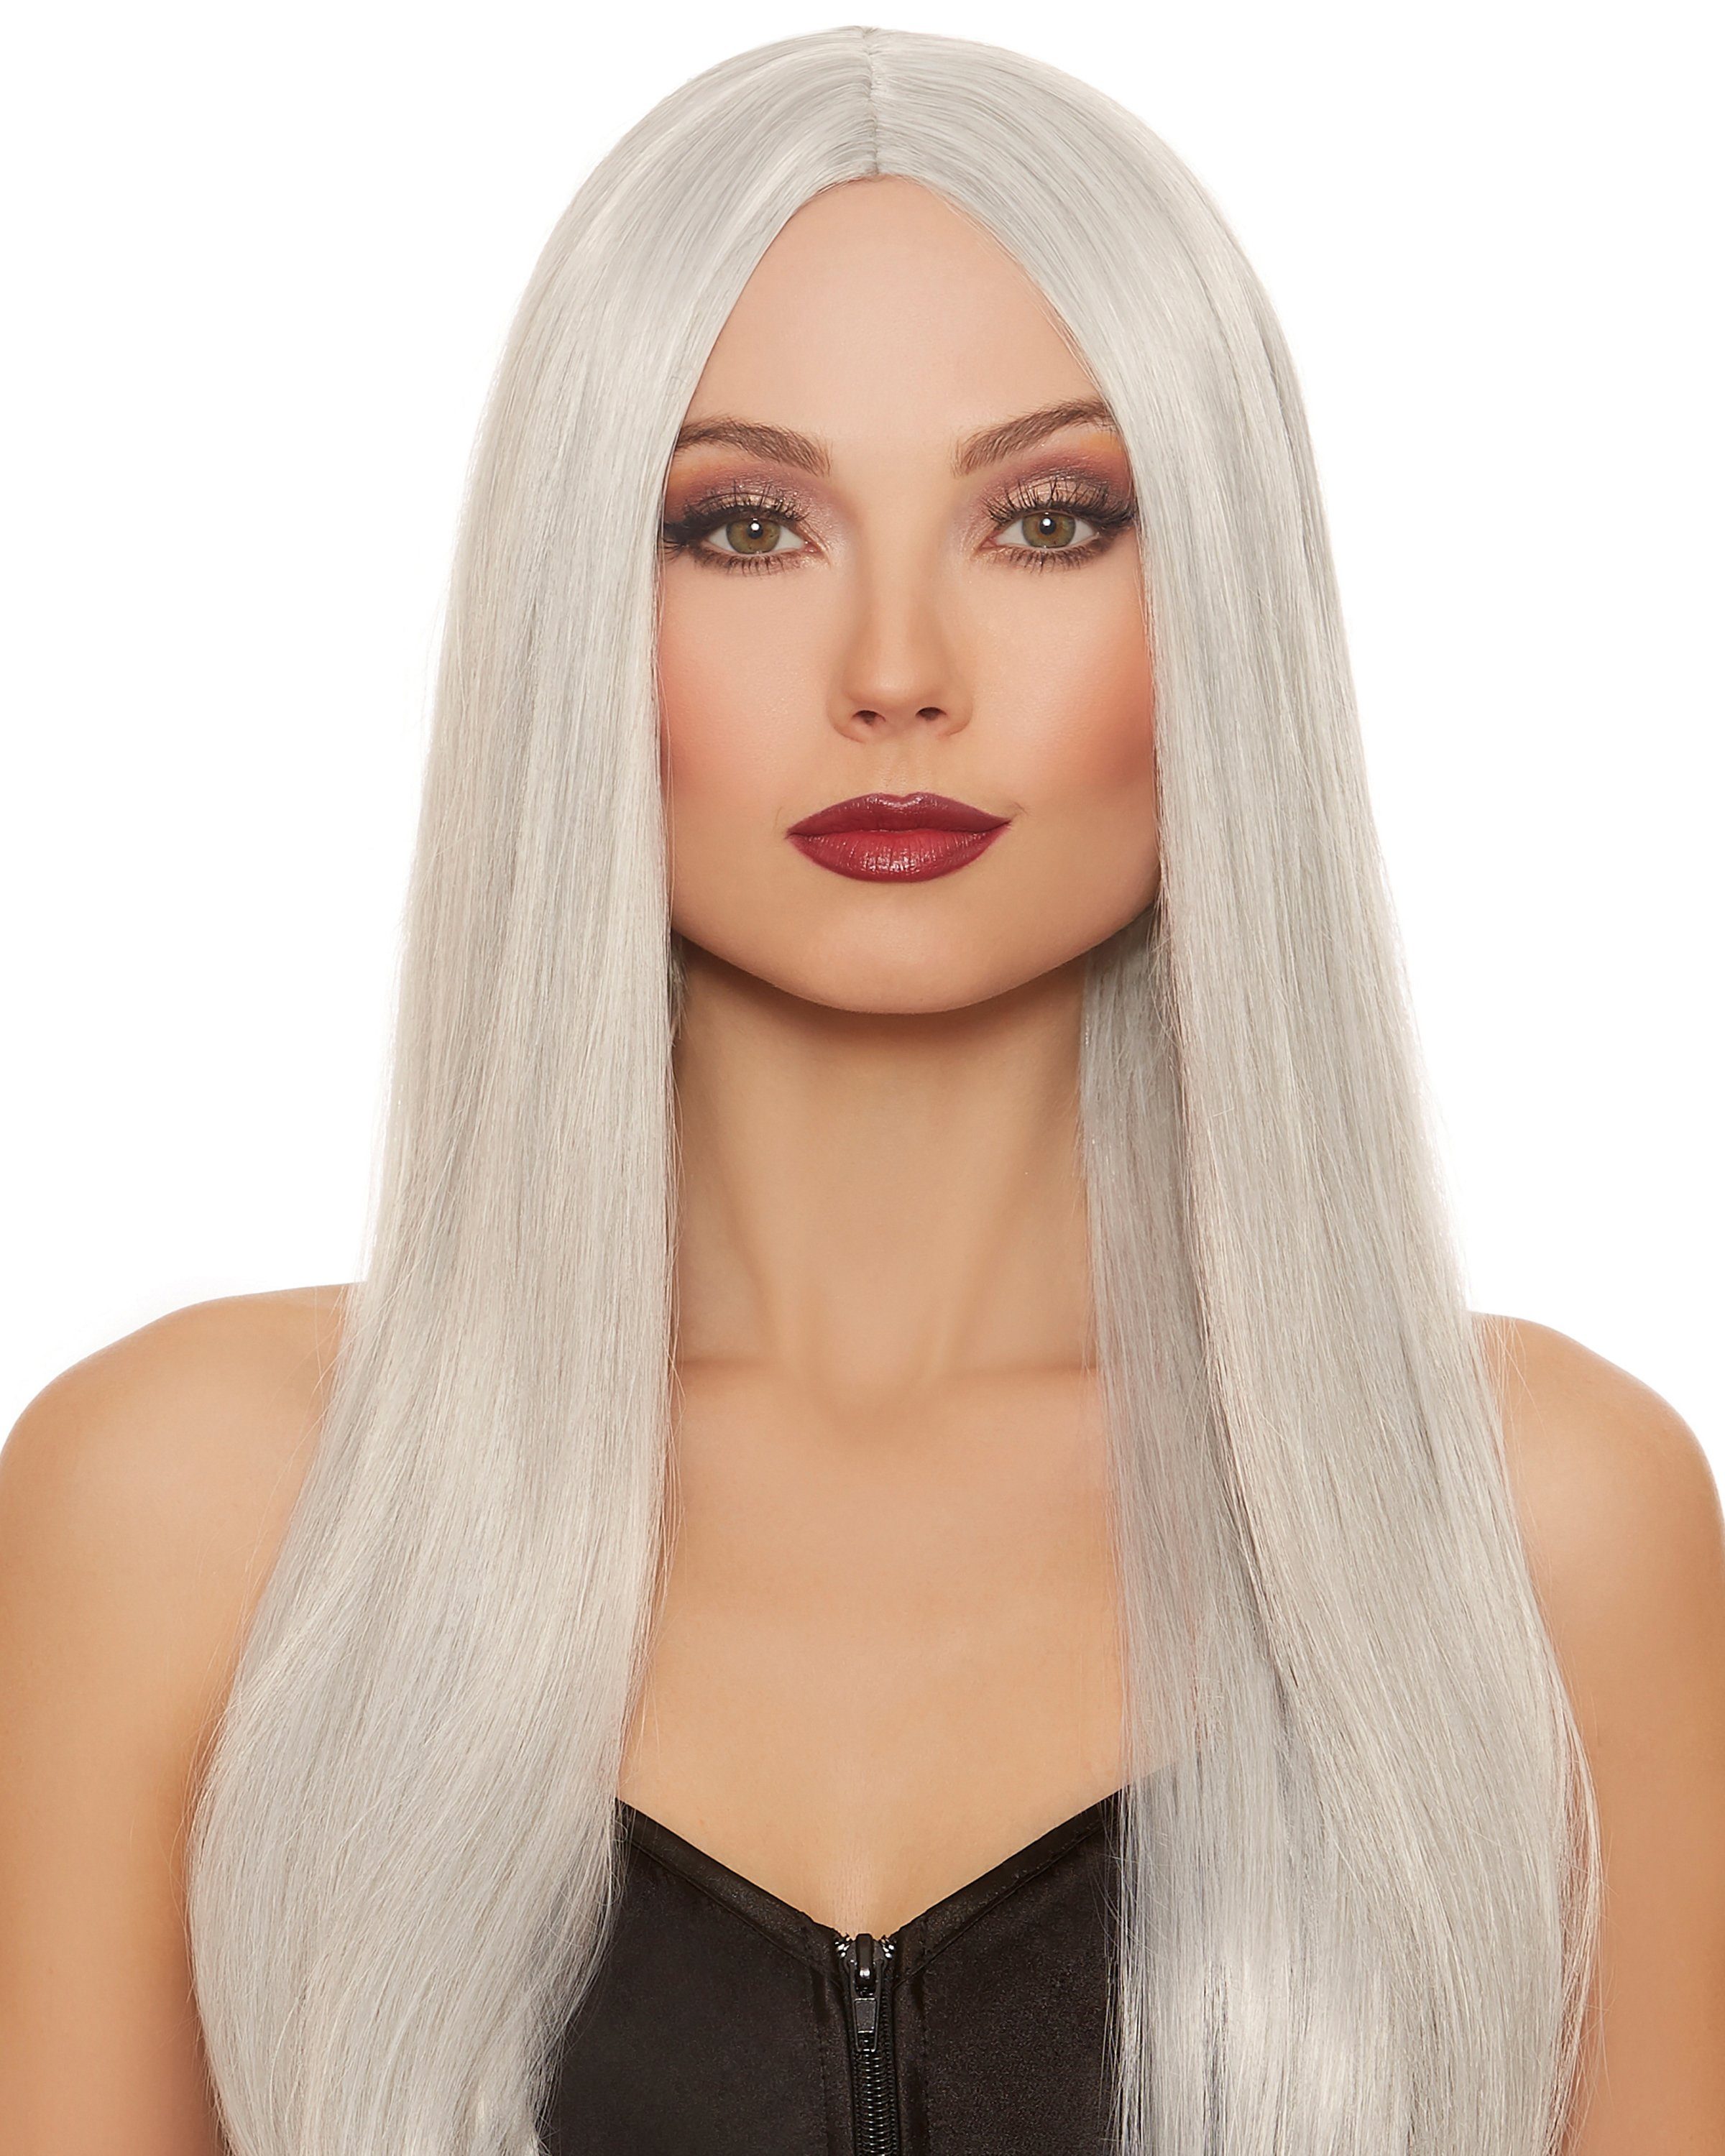 Extra-Long Straight Wig Wig Dreamgirl Costume Adjustable Gray / White Mix 